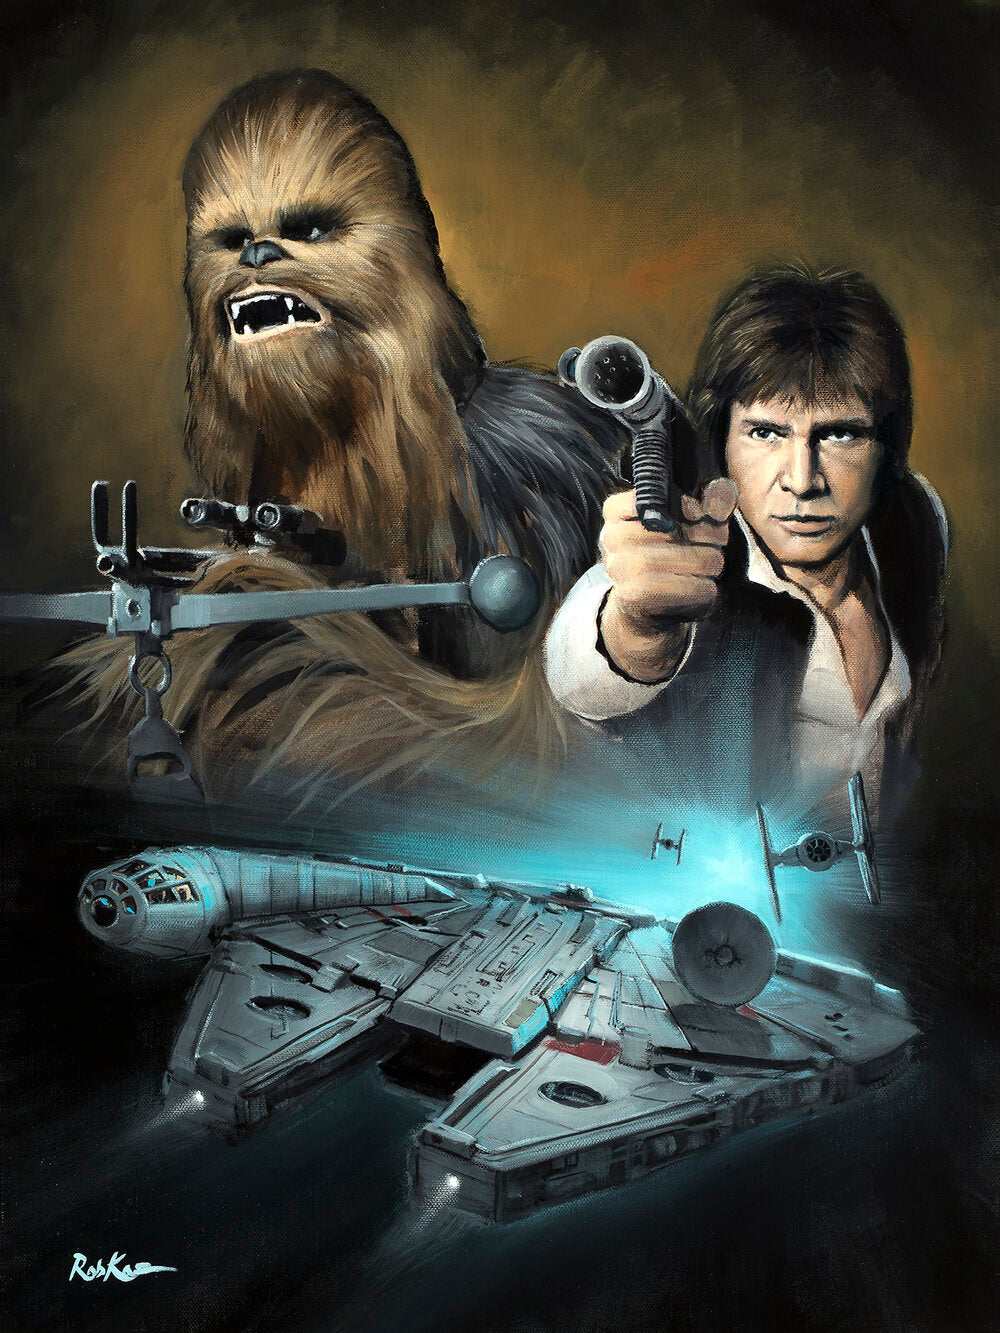 Rob Kaz Star Wars "Wookiee and the Scoundrel" Limited Edition Canvas Giclee